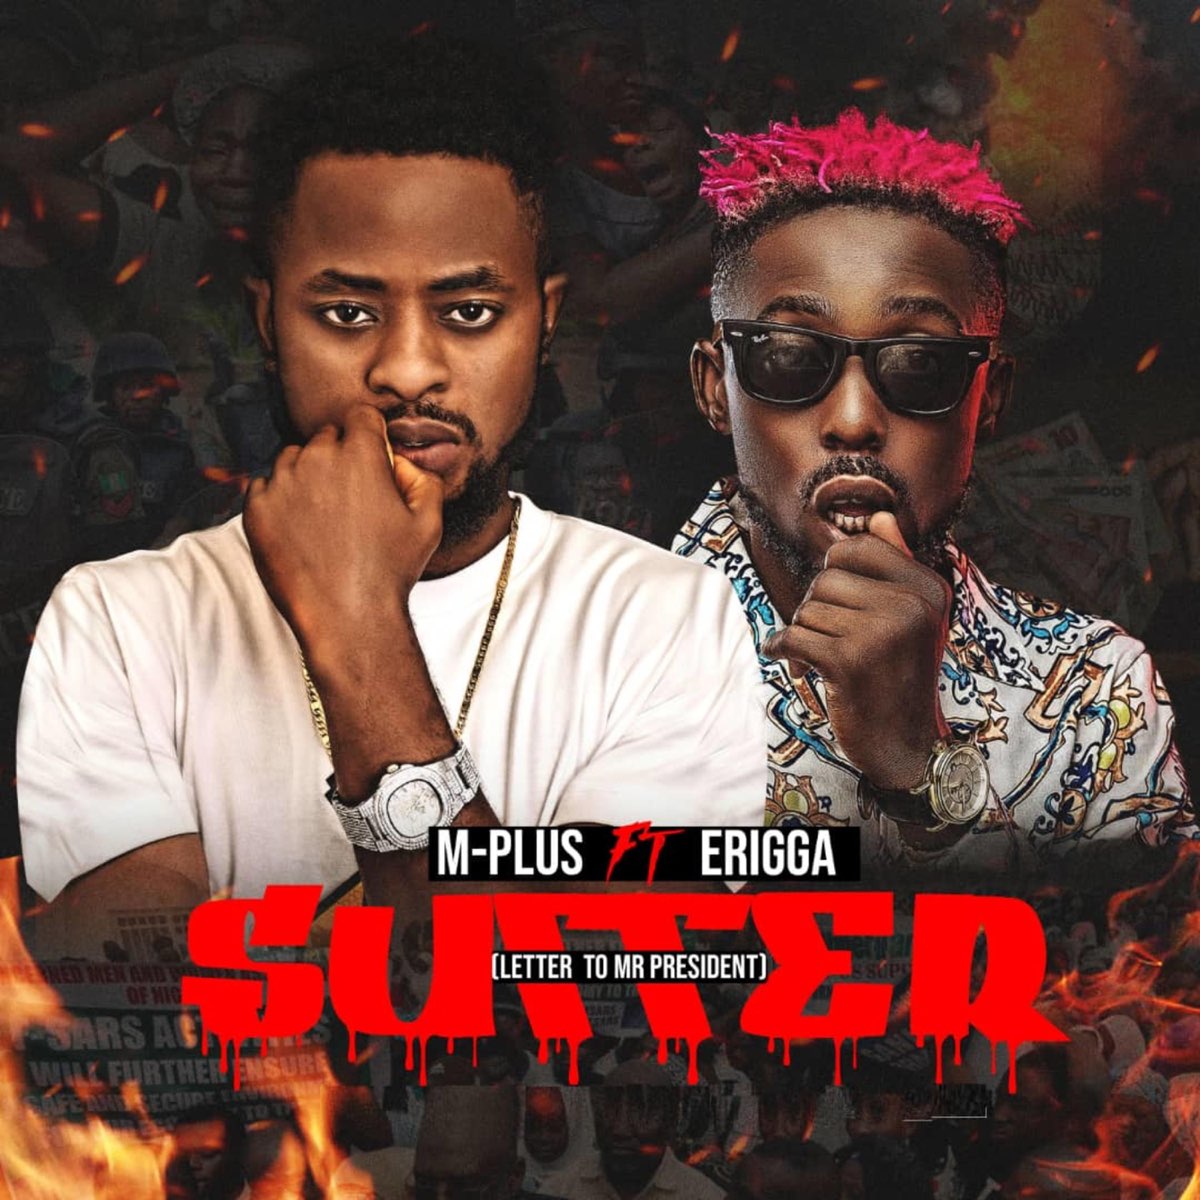 Suffer (Letter To Mr President) [Feat. Erigga] - Single By M-Plus On Apple  Music